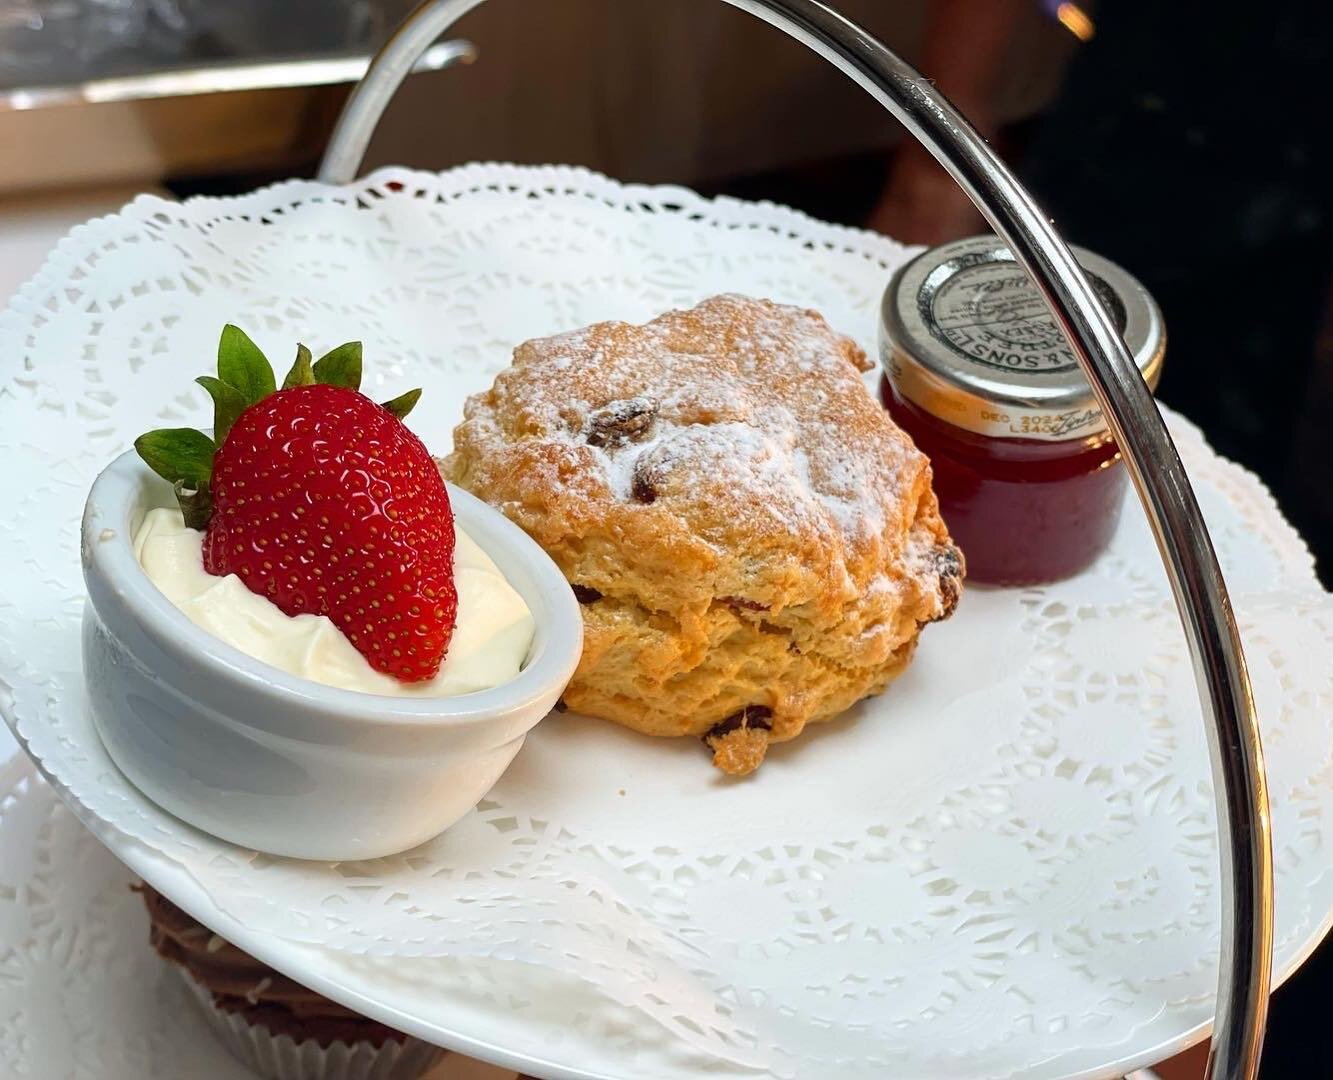 You can&rsquo;t beat a homemade scone served with jam &amp; cream!!🤍❤️🤍 we served these with our afternoon tea from our open day ✨

Our next open day will be on the 11th of September! 😍